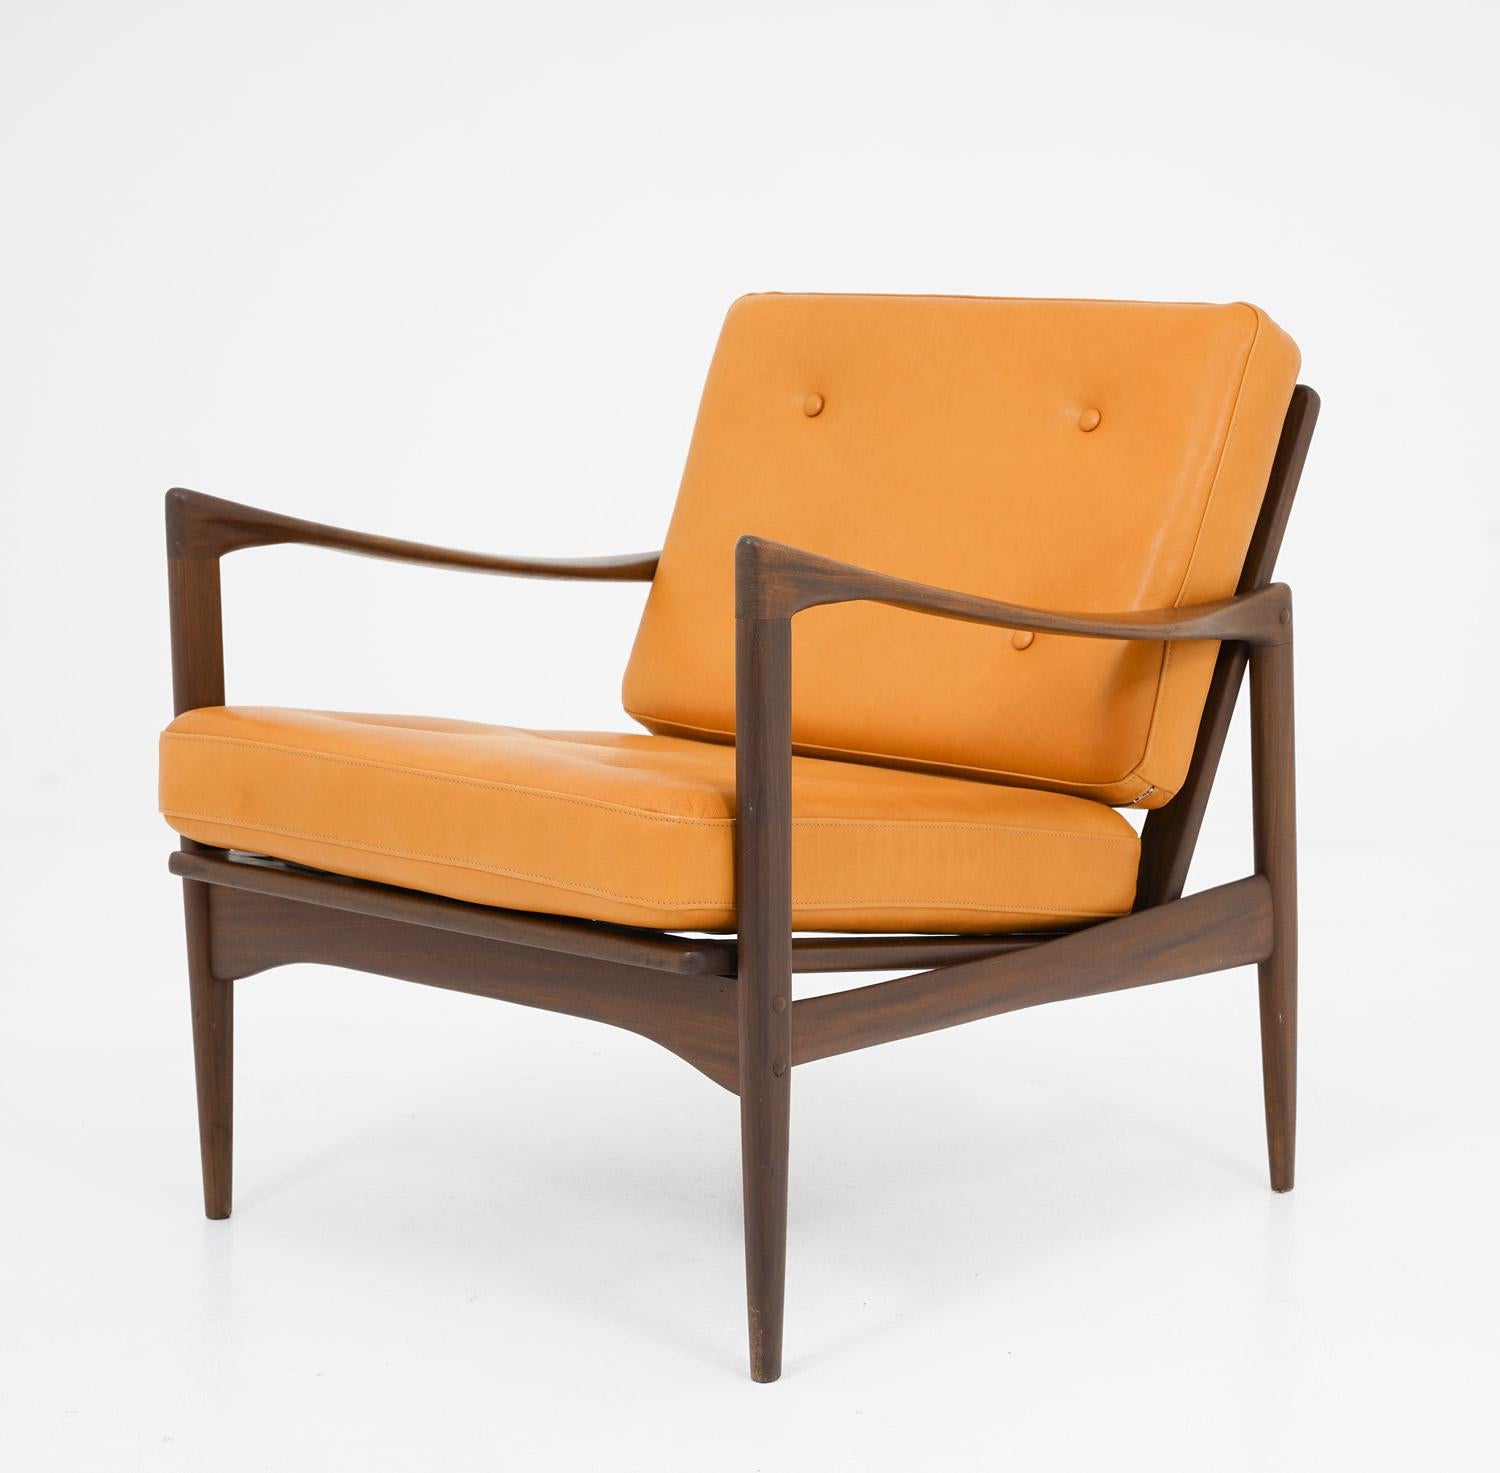 A beautiful pair of lounge chairs, model 